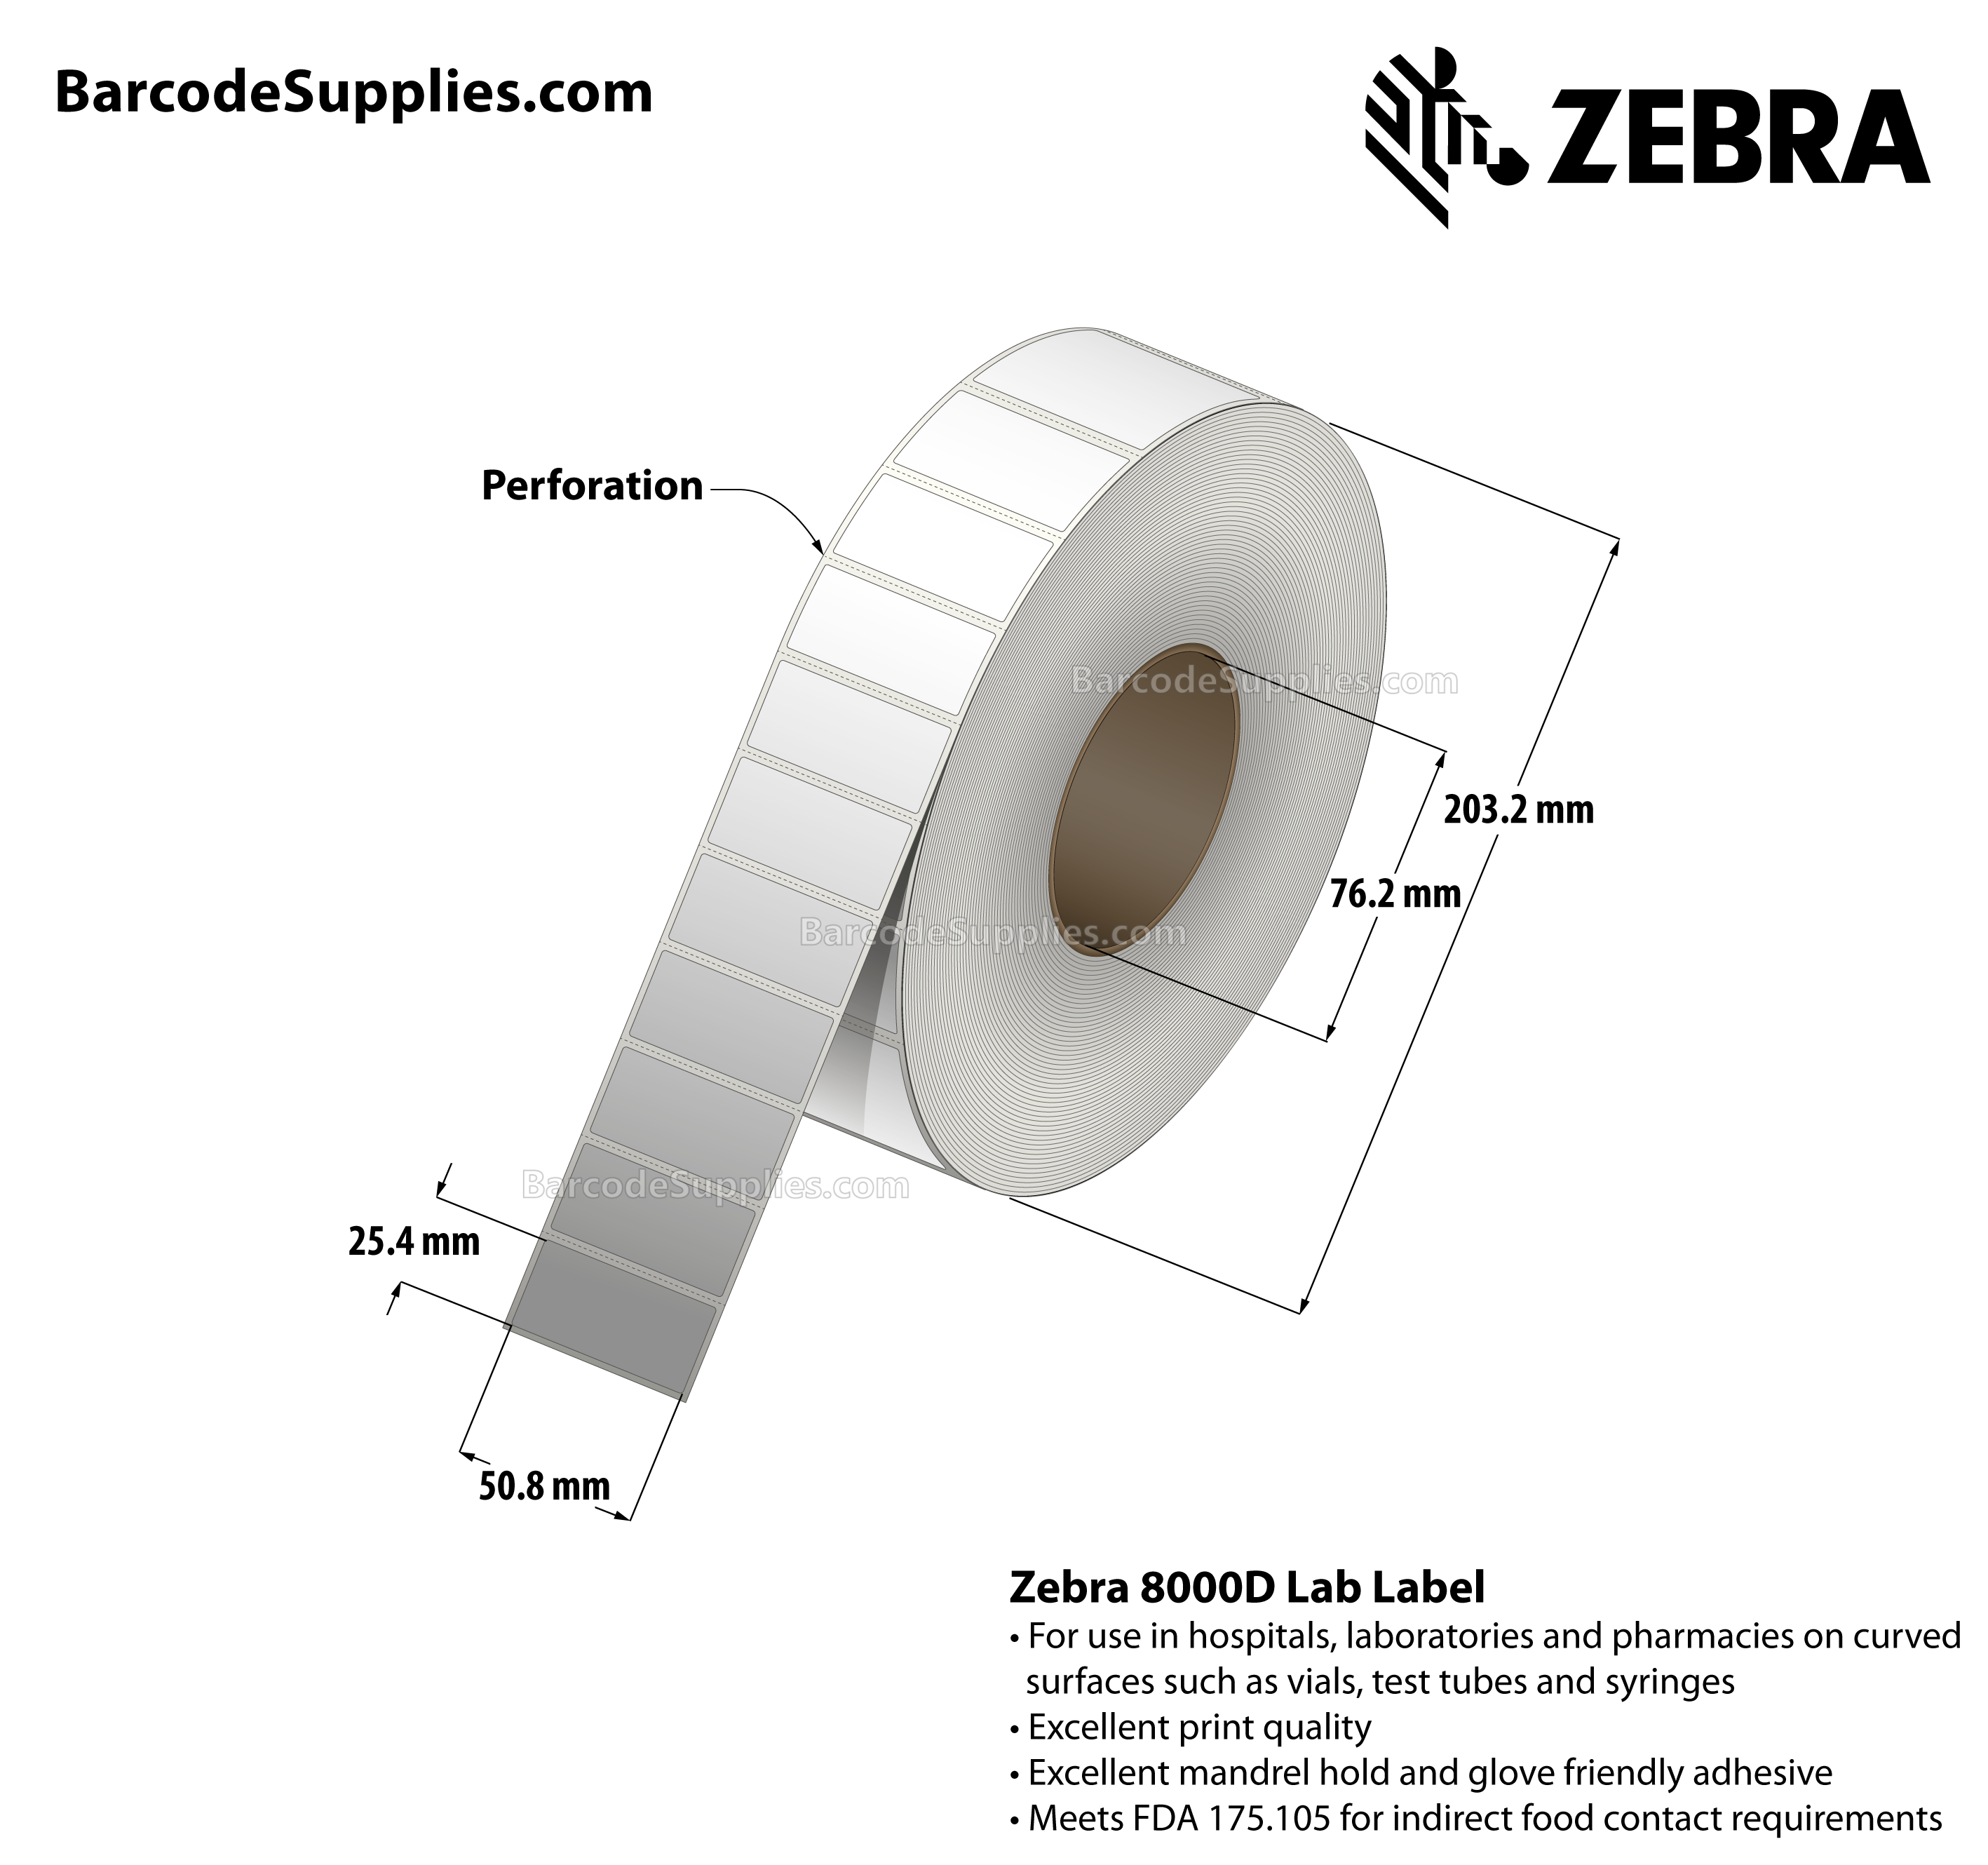 2 x 1 Direct Thermal White 8000D Lab Labels With Permanent Adhesive - Perforated - 5200 Labels Per Roll - Carton Of 6 Rolls - 31200 Labels Total - MPN: 10028317